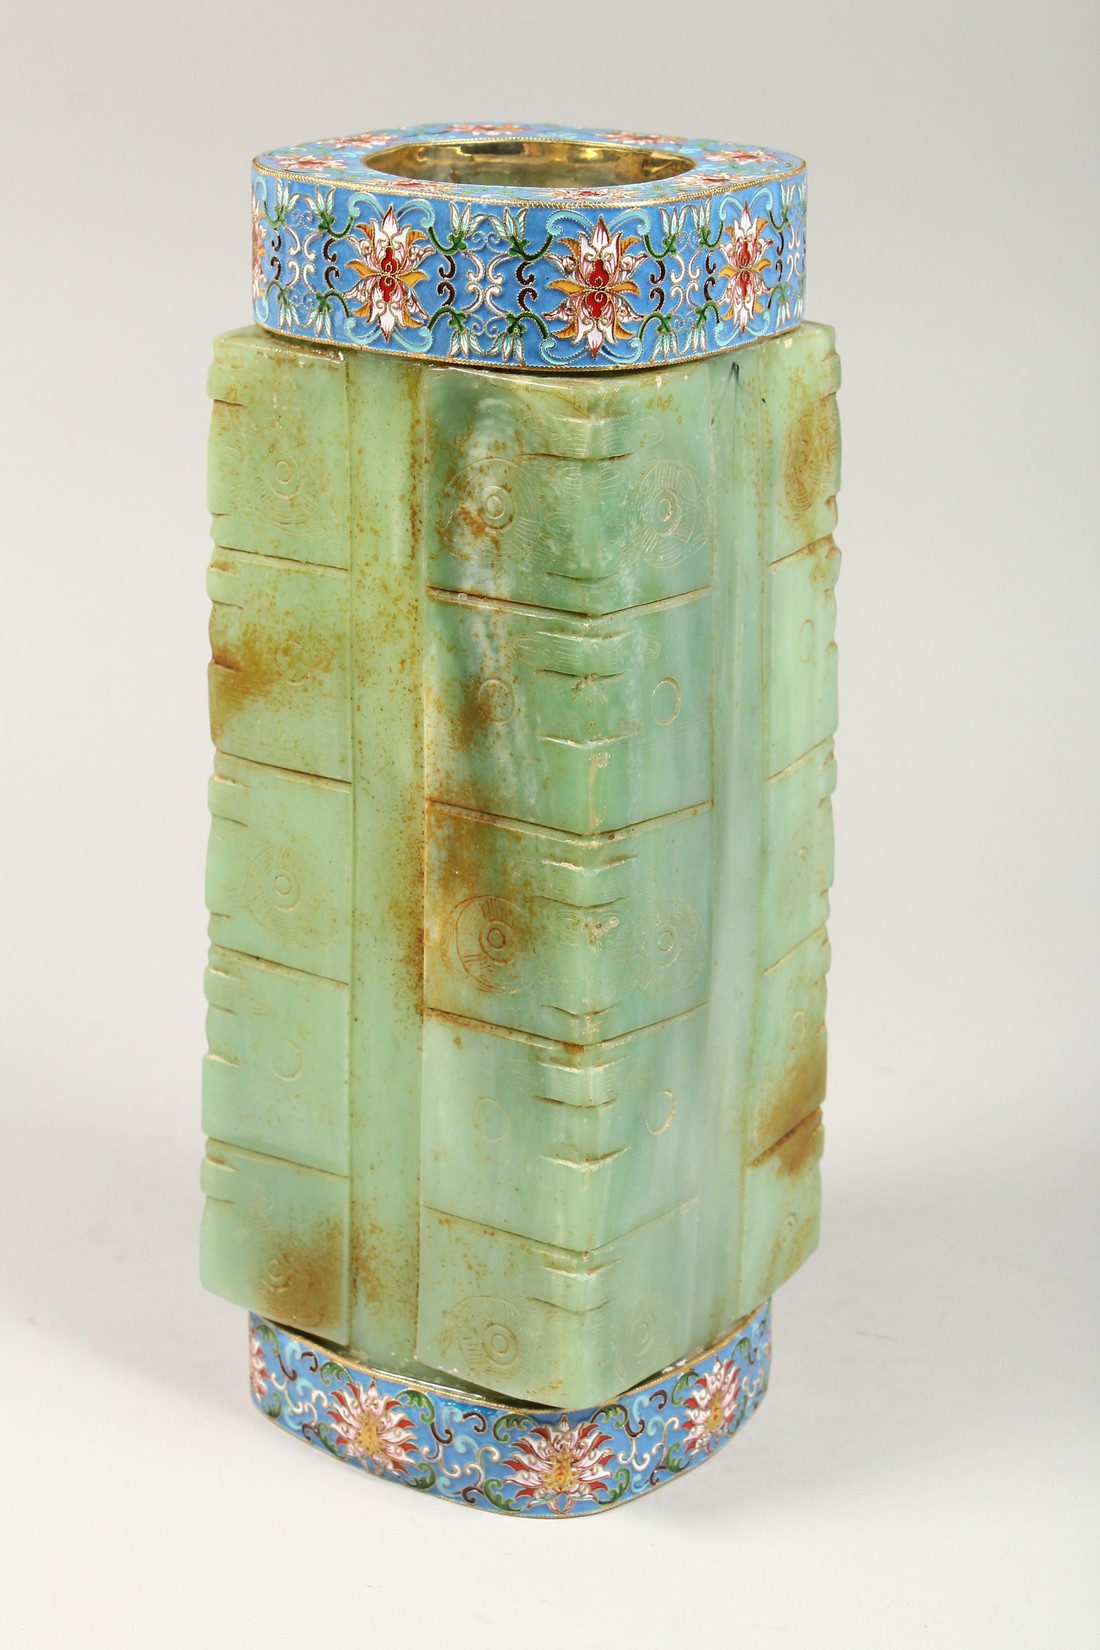 A SUPERB LARGE RUSSIAN JADE AND CLOISSONE ENAMEL VASE 12ins high. - Image 3 of 6